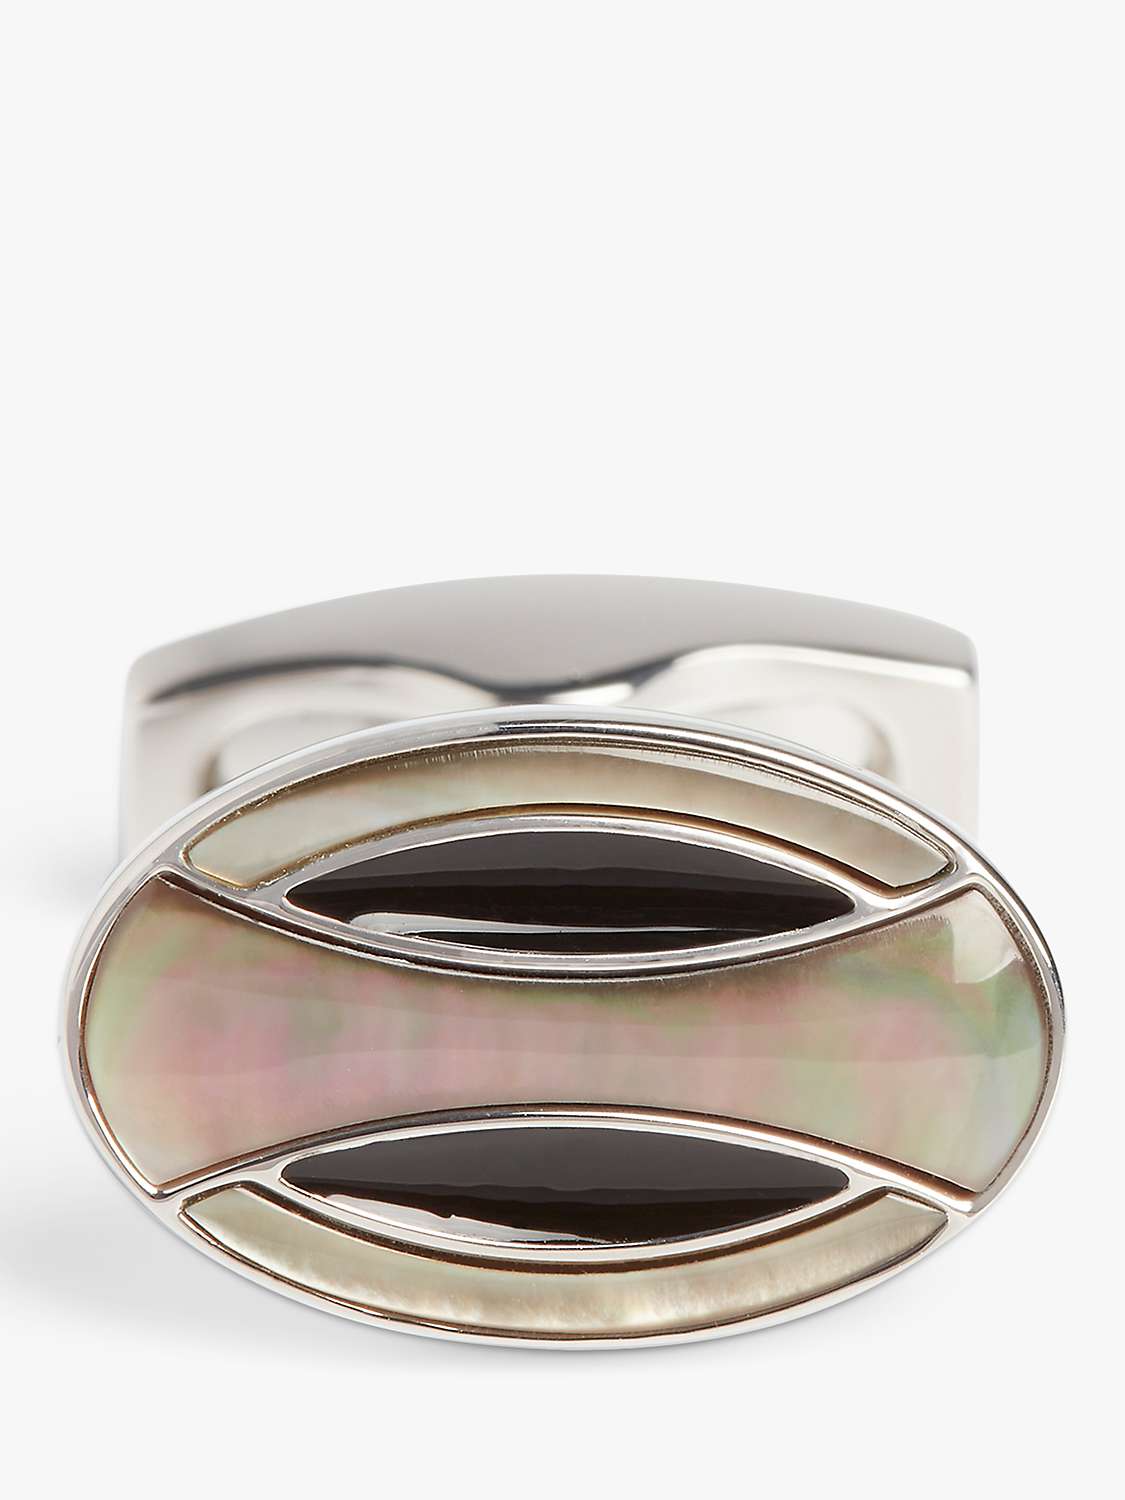 Buy Simon Carter Deco Curve Mother Of Pearl Cufflinks, Grey Silver Online at johnlewis.com